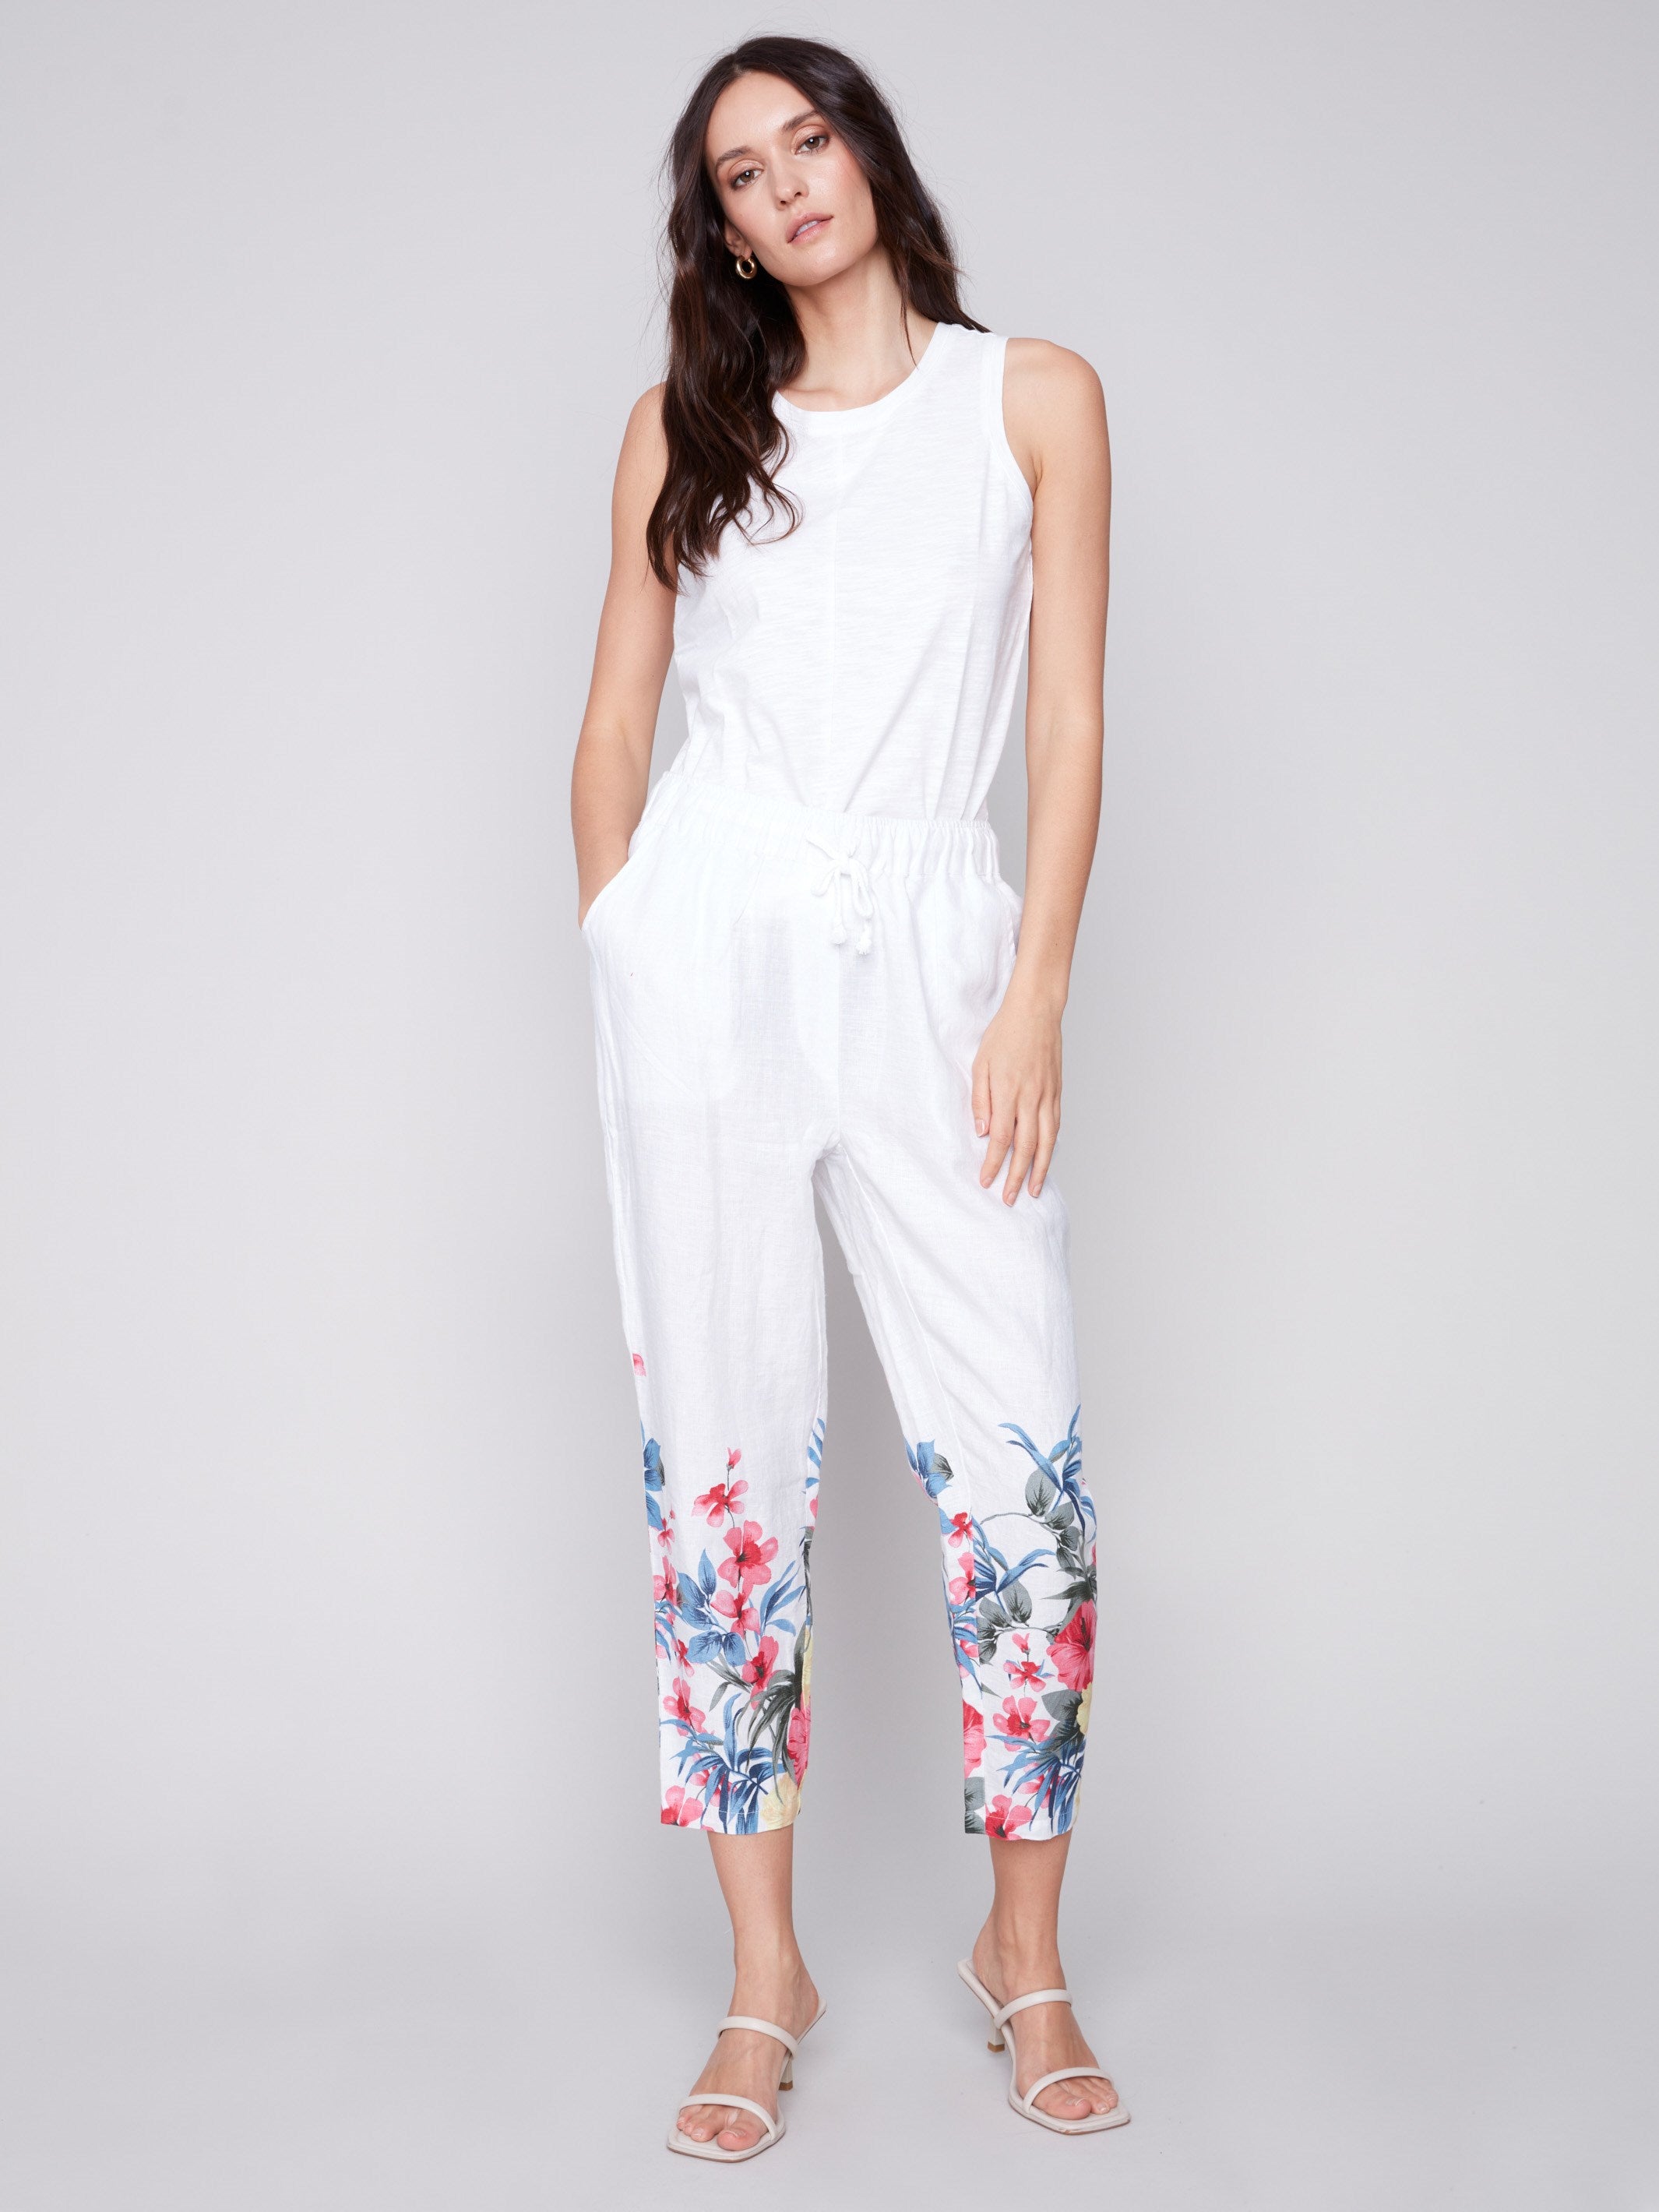 Printed Linen Pull-On Pants - Maui - Charlie B Collection Canada - Image 1